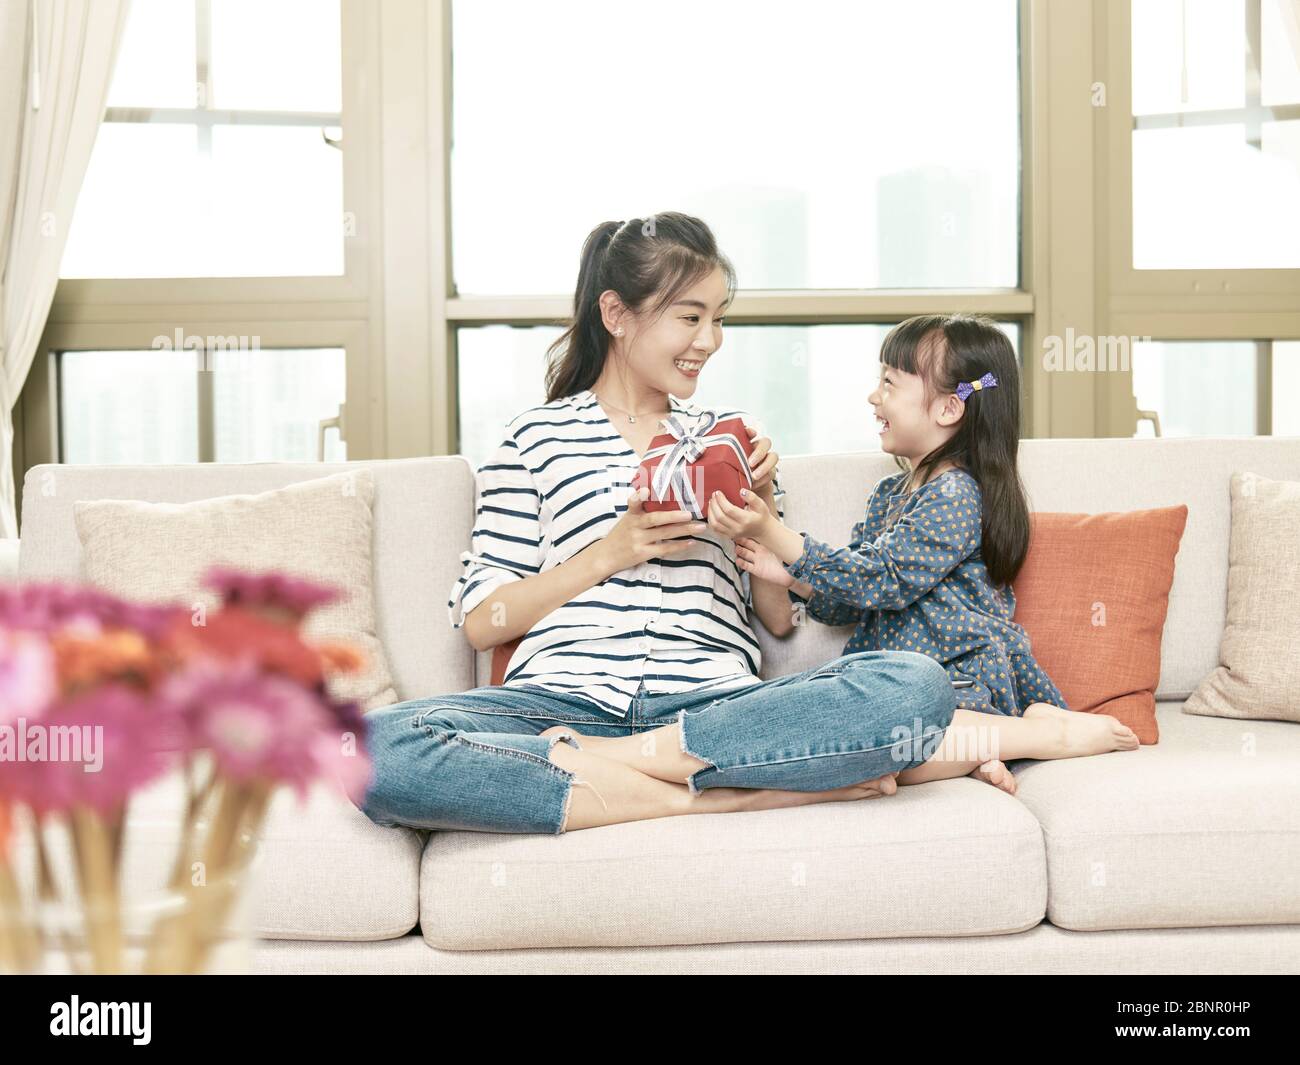 young asian woman receiving a present from daughter on birthday day Stock Photo